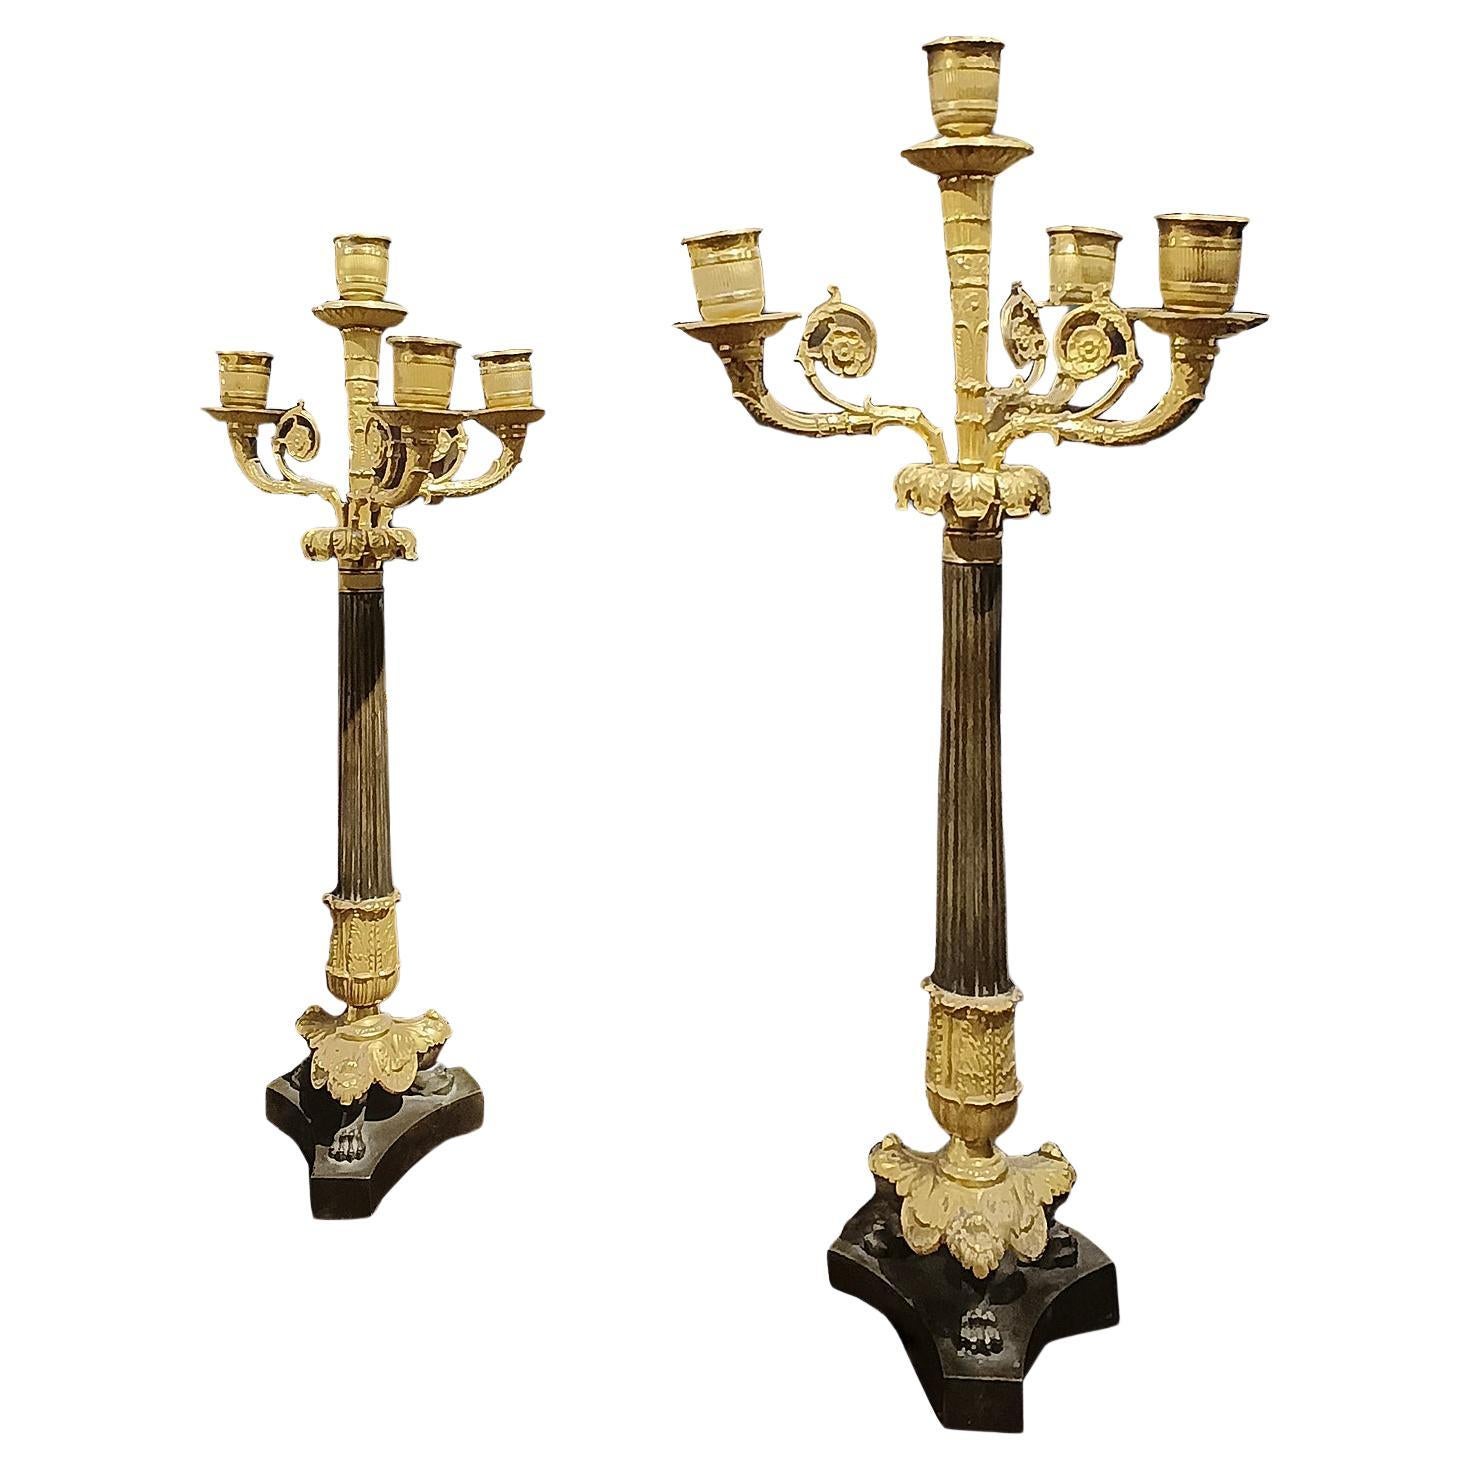 EARLY 19th CENTURY PAIR OF CARLO X BRONZE CANDLESTICKS